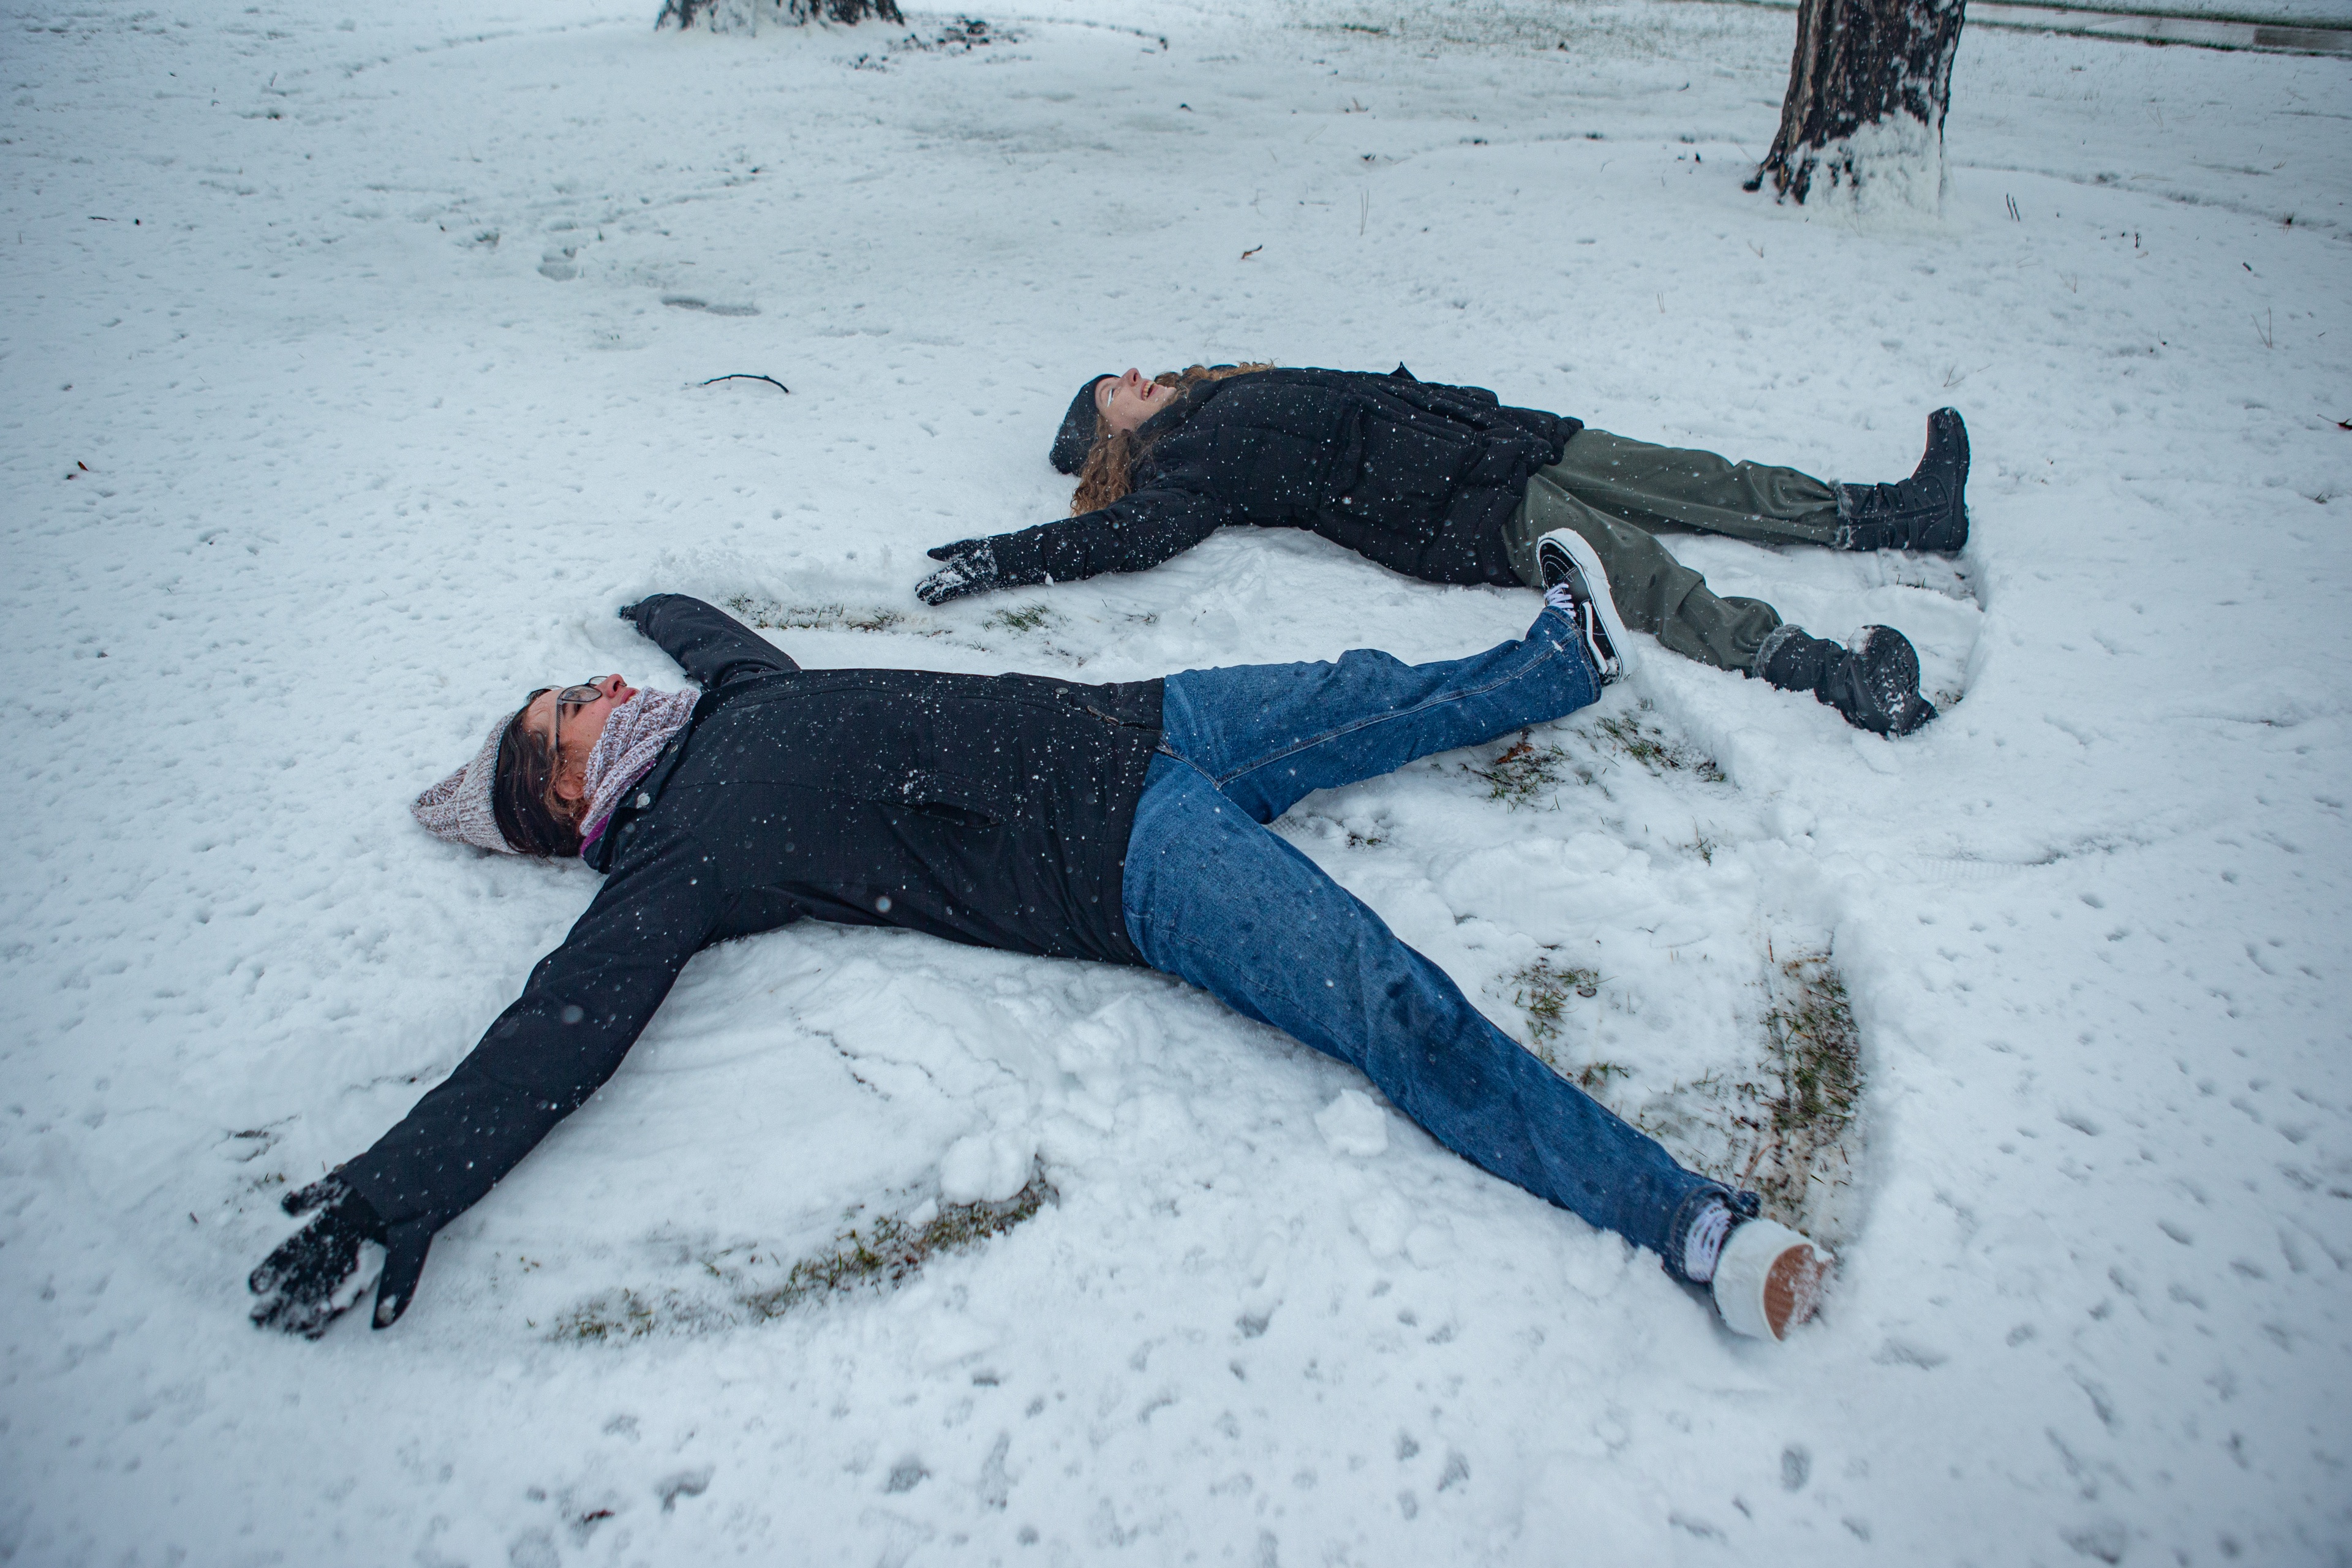 Two students make snow angels